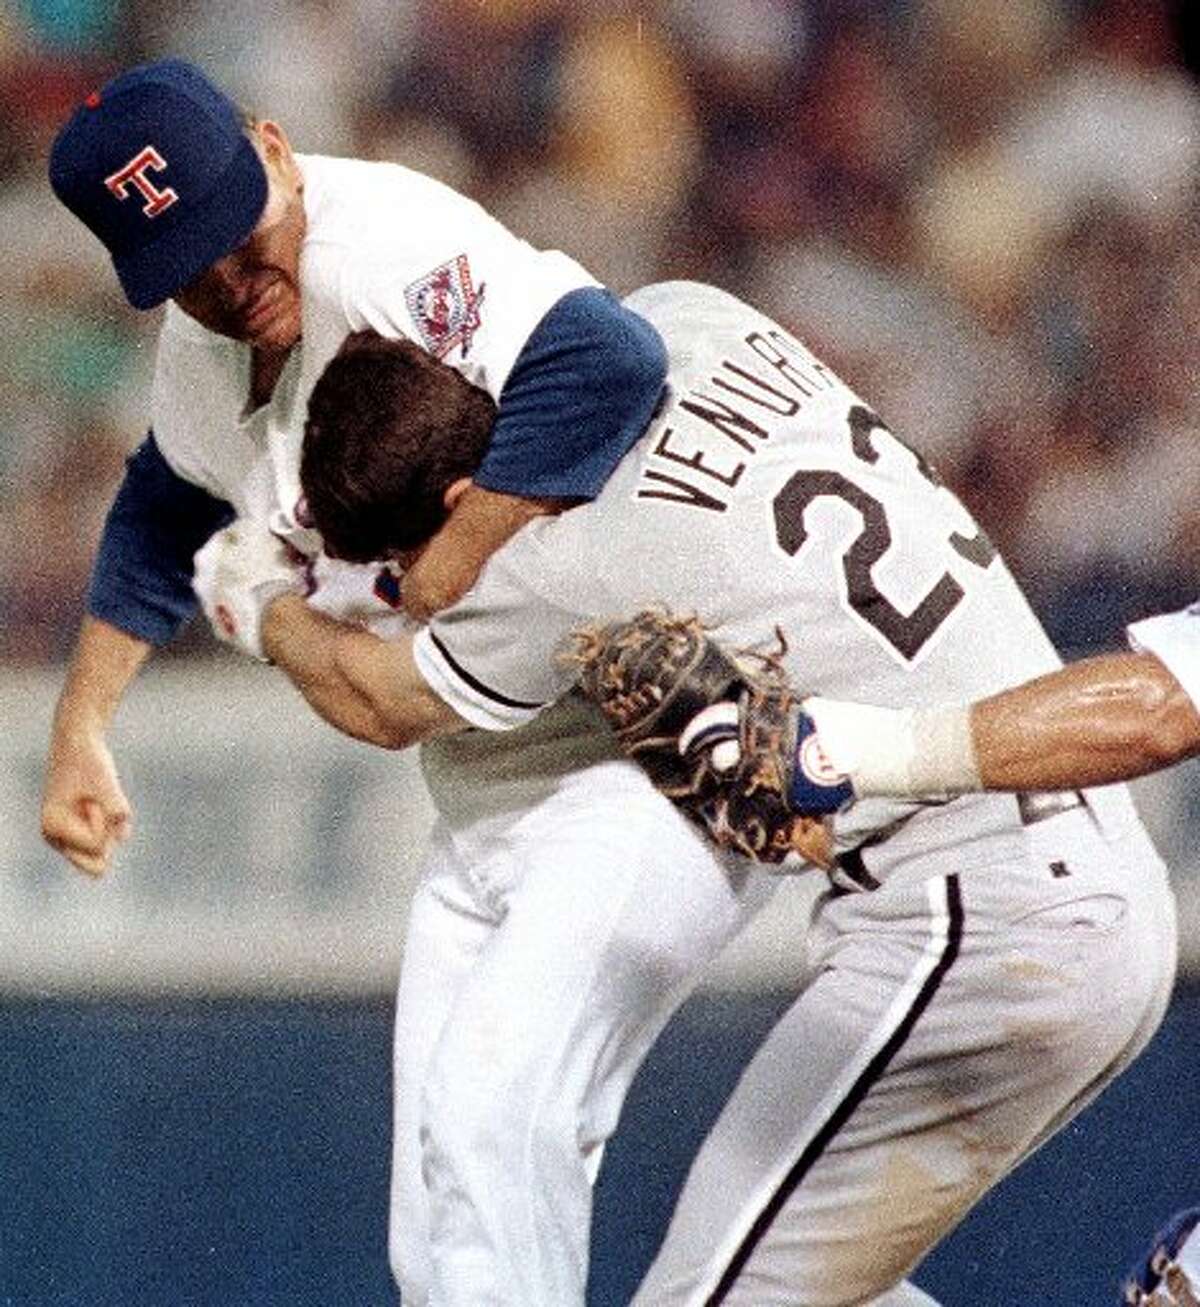 Nolan Ryan Through The Years THE MOST FAMOUS BASEBALL BEATDOWN EVER This classic photo shows Nolan Ryan's famous fight with Robin Ventura.